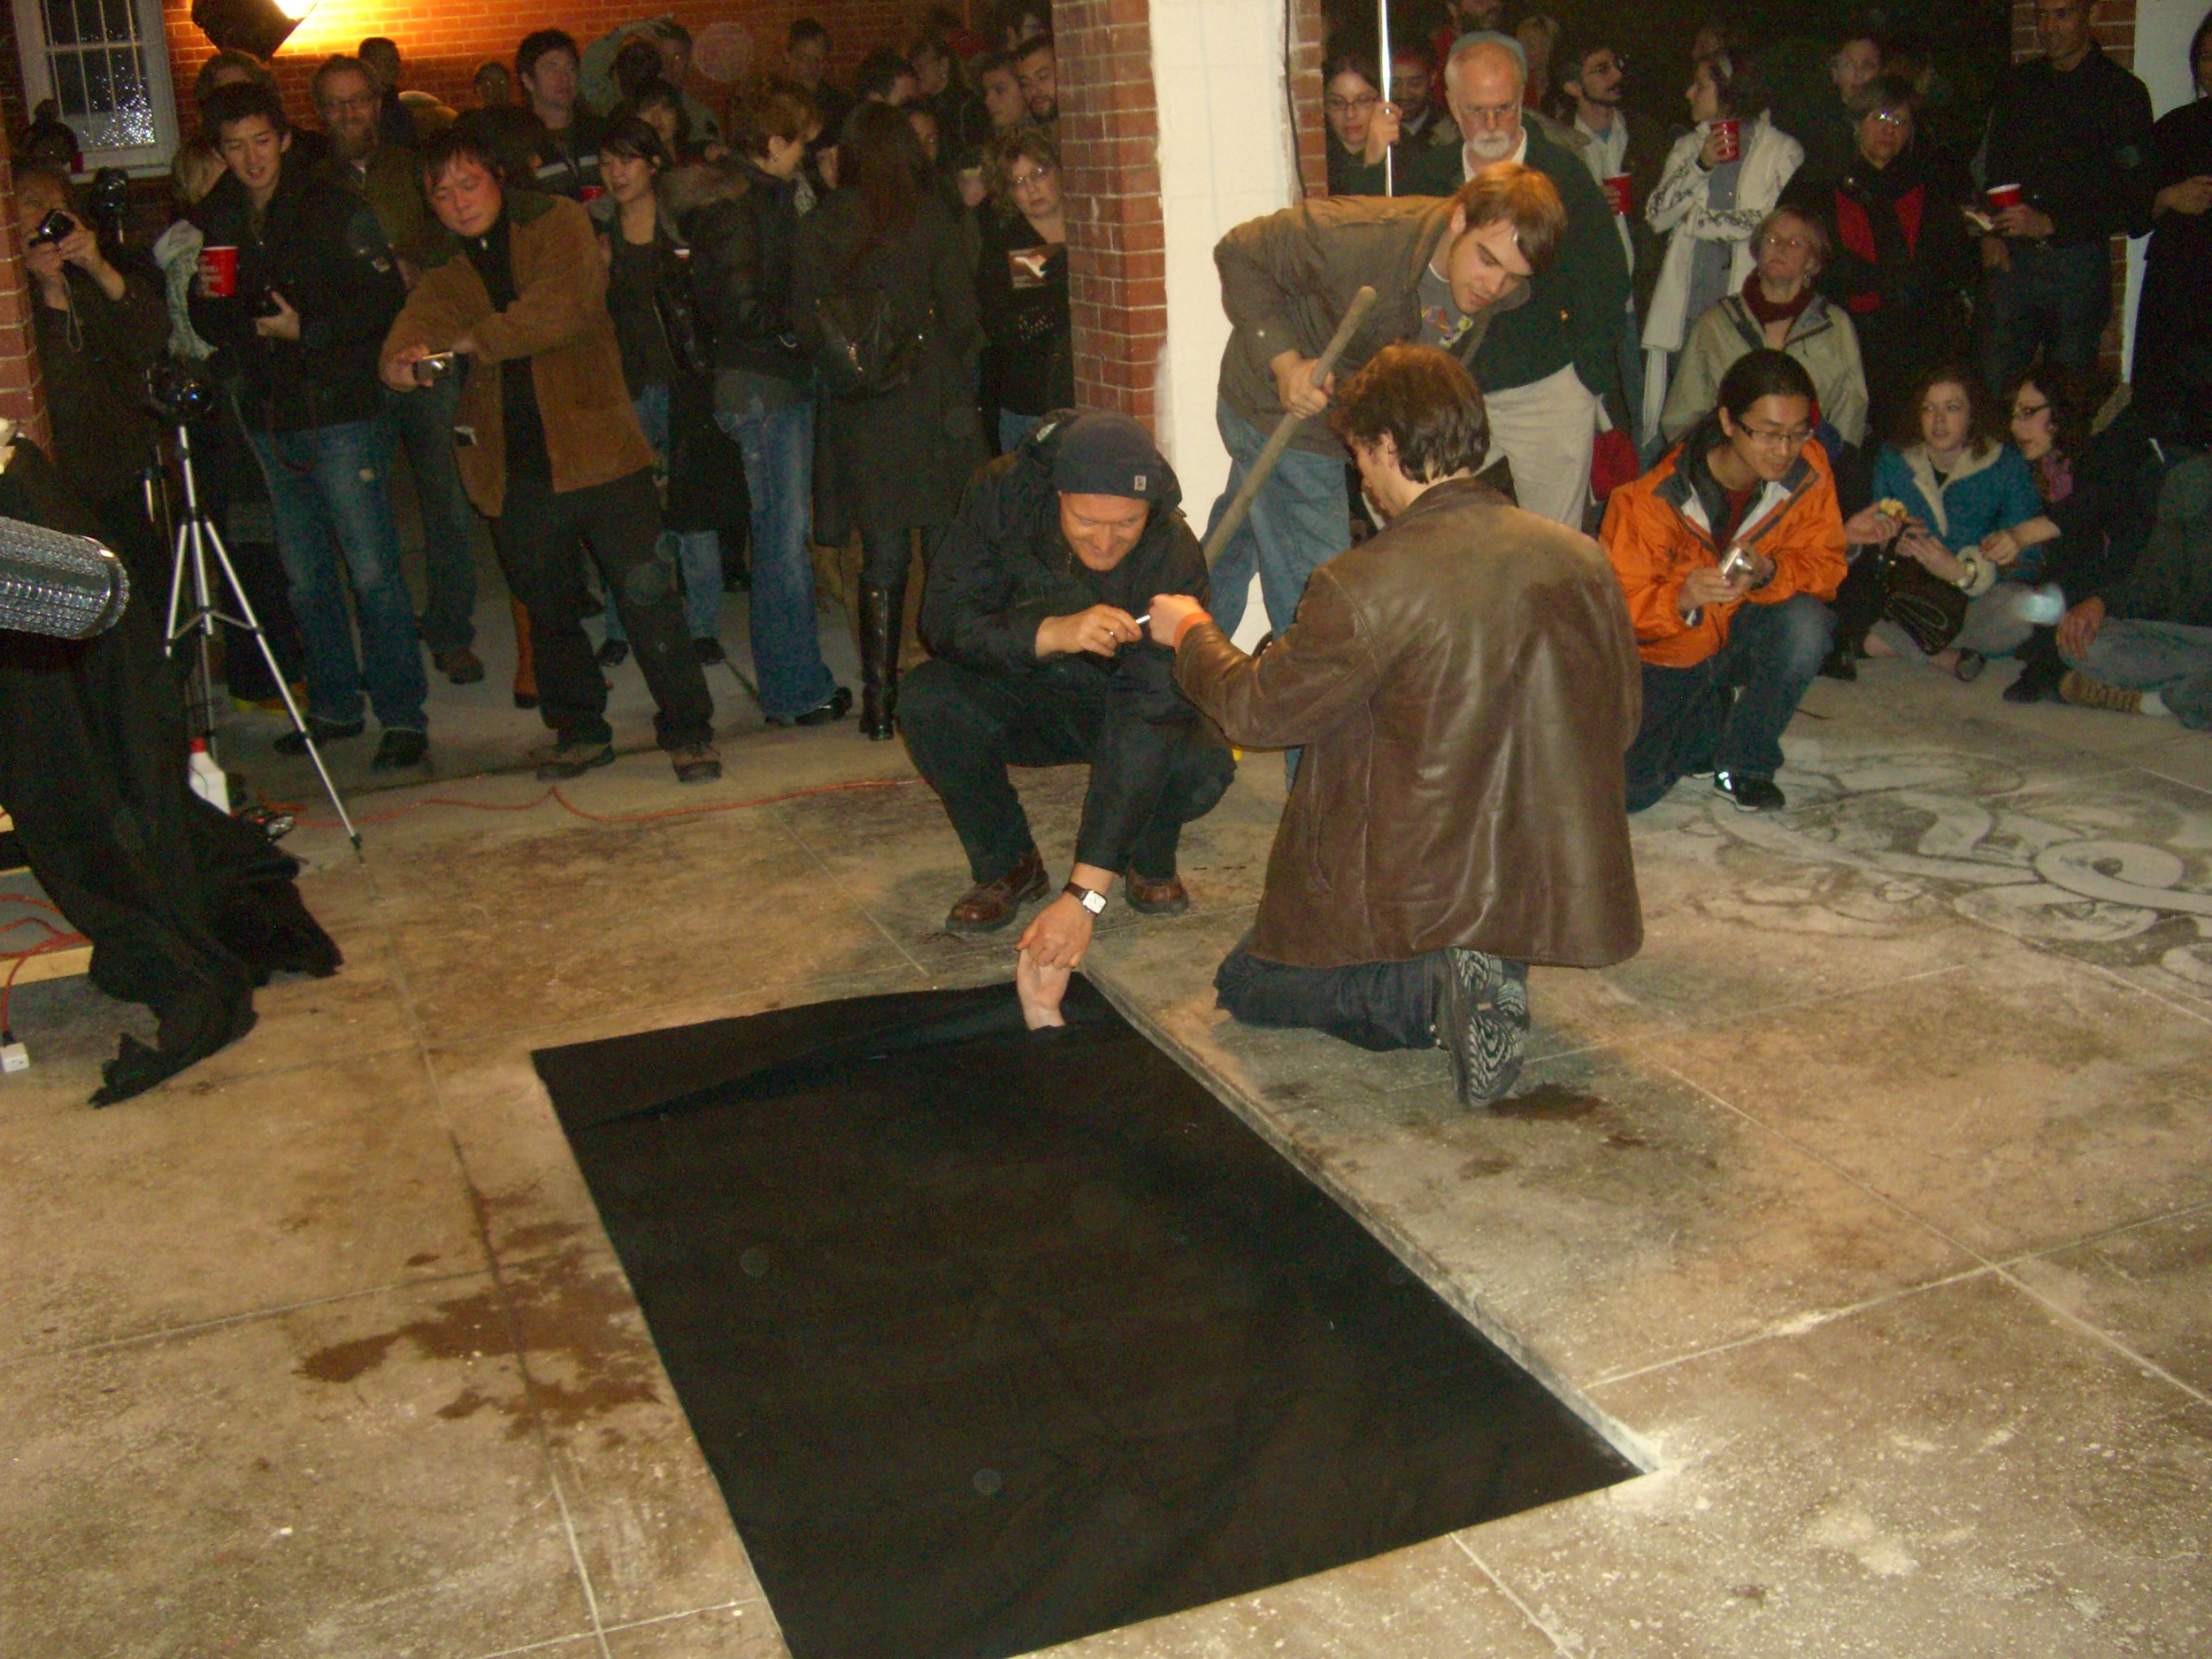 Calling A Stranger in the Hole by Scott Kildall for 100 Performances for the Hole, 2009